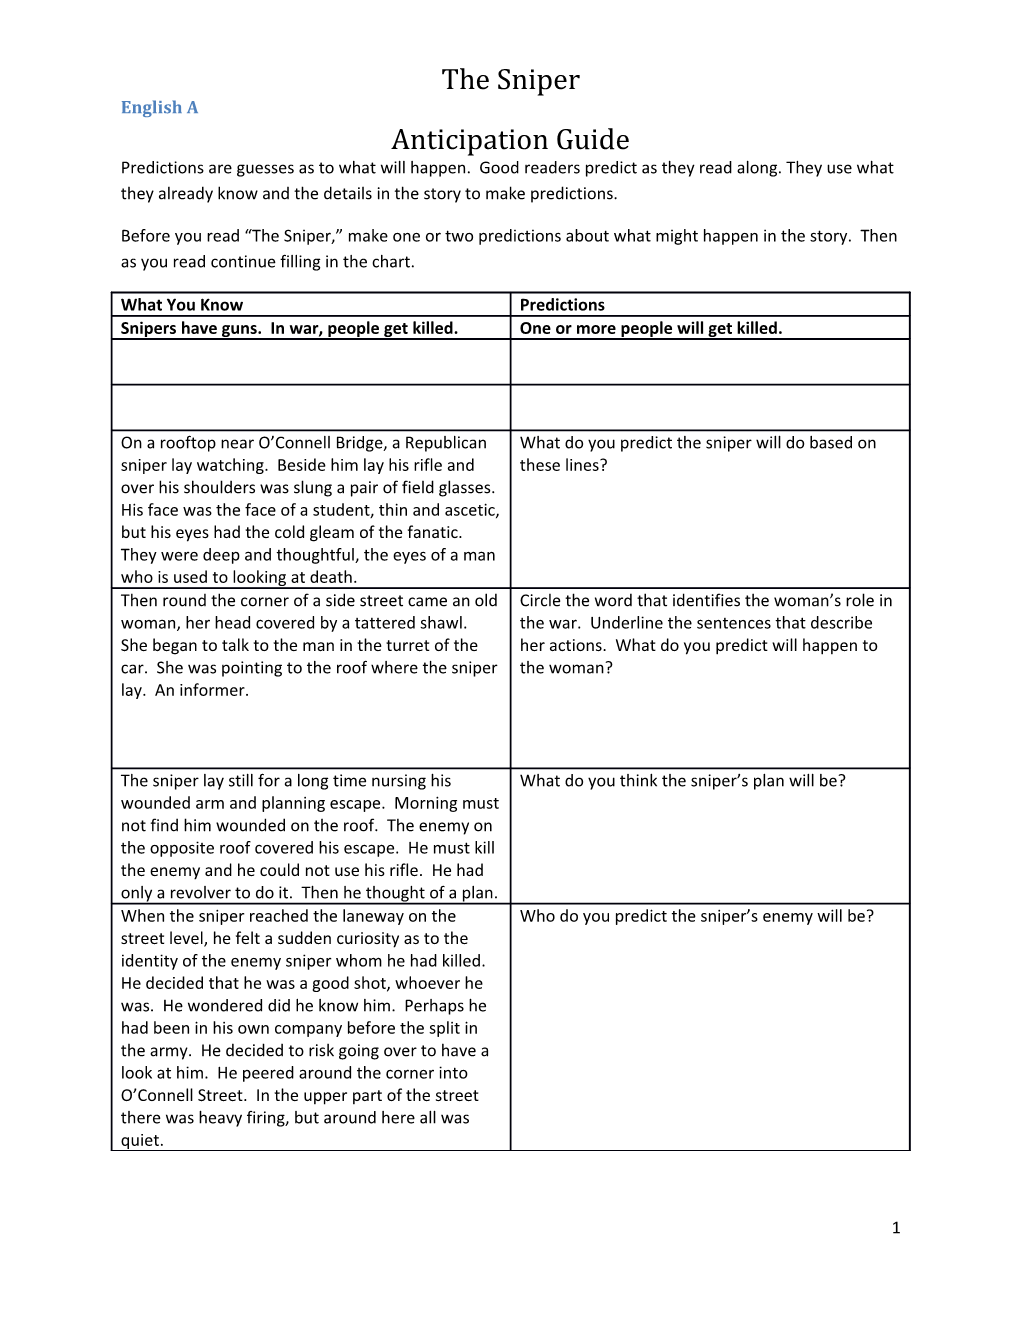 The Sniper Study Guide English A